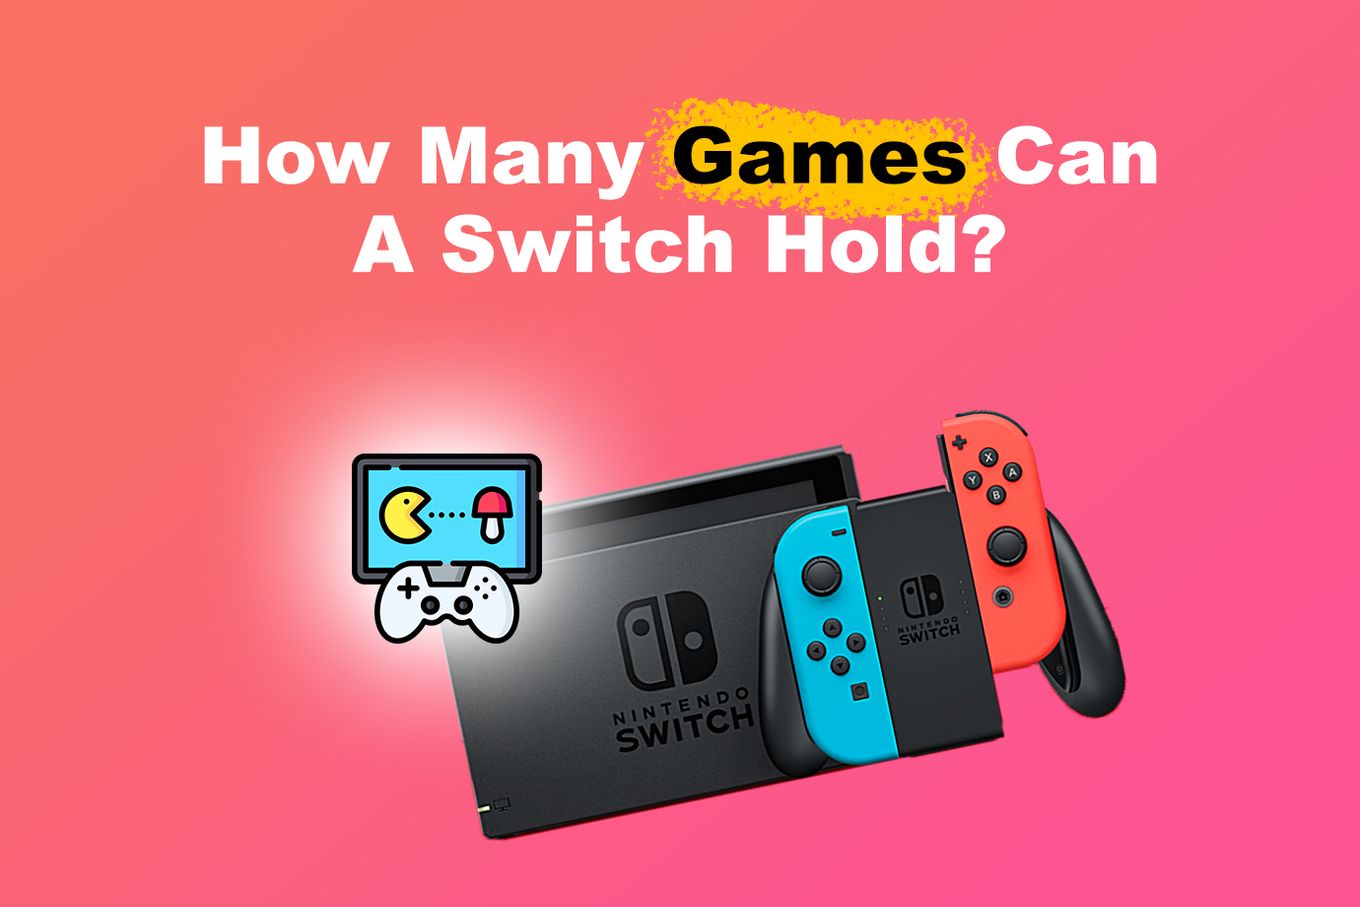 How Many Games Can a Switch Hold?